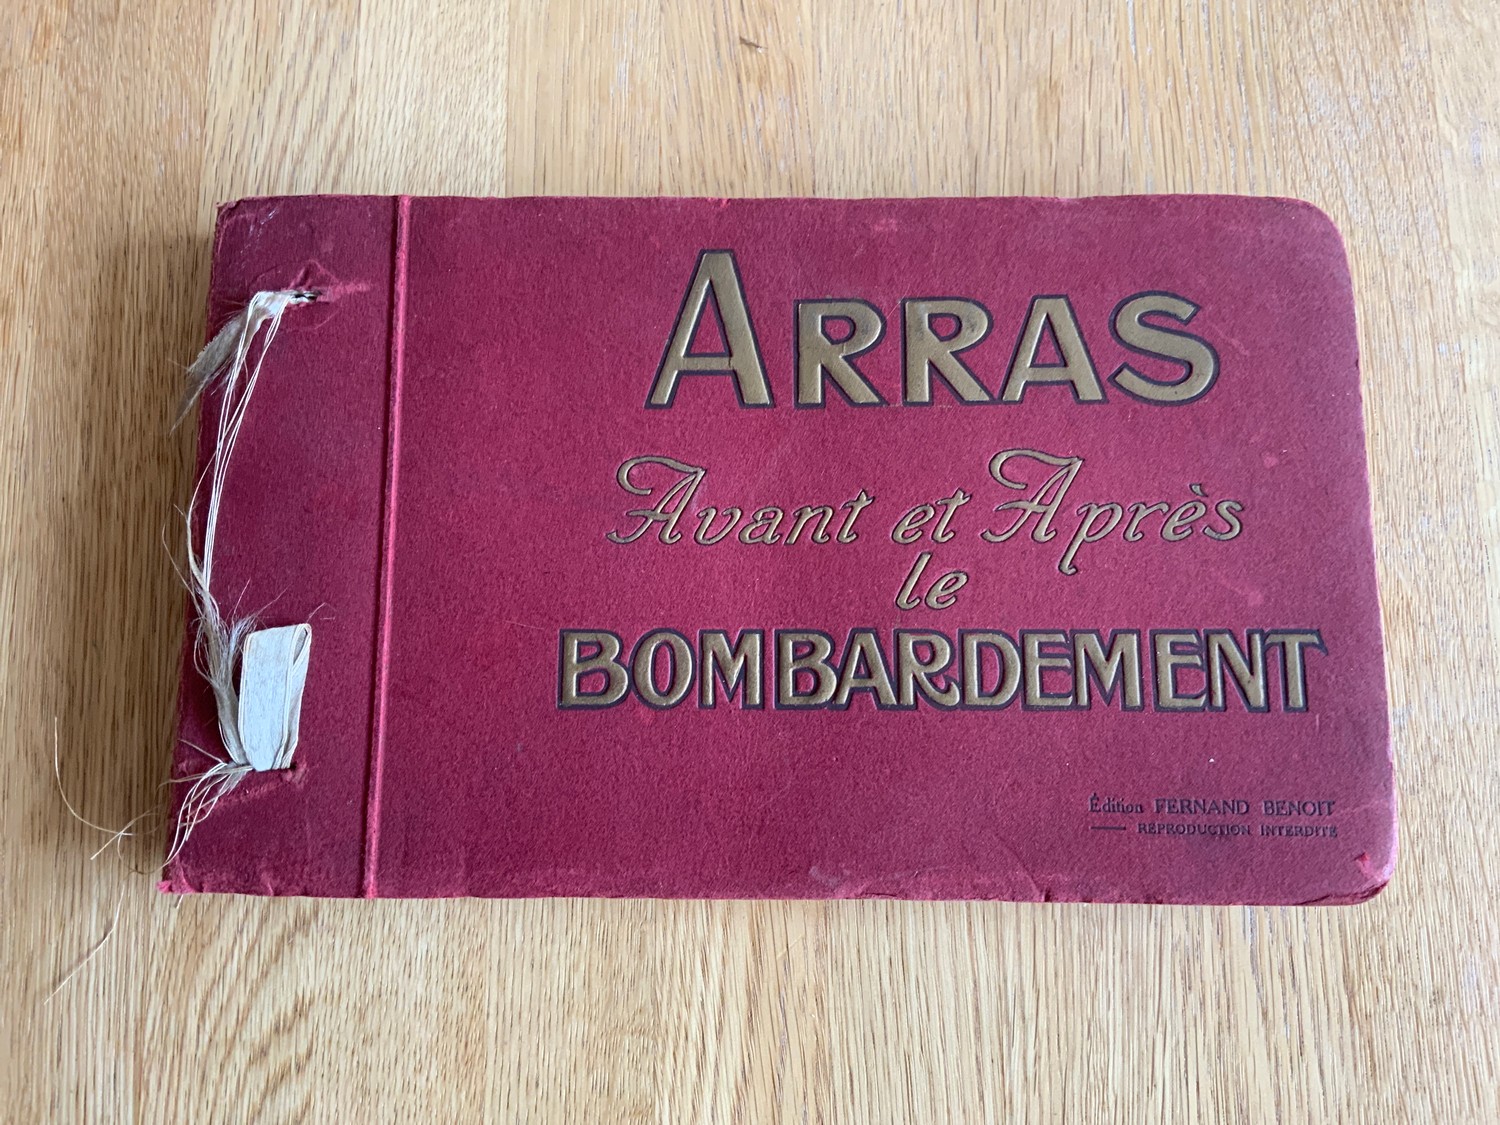 Arras Before and After the Bombardment